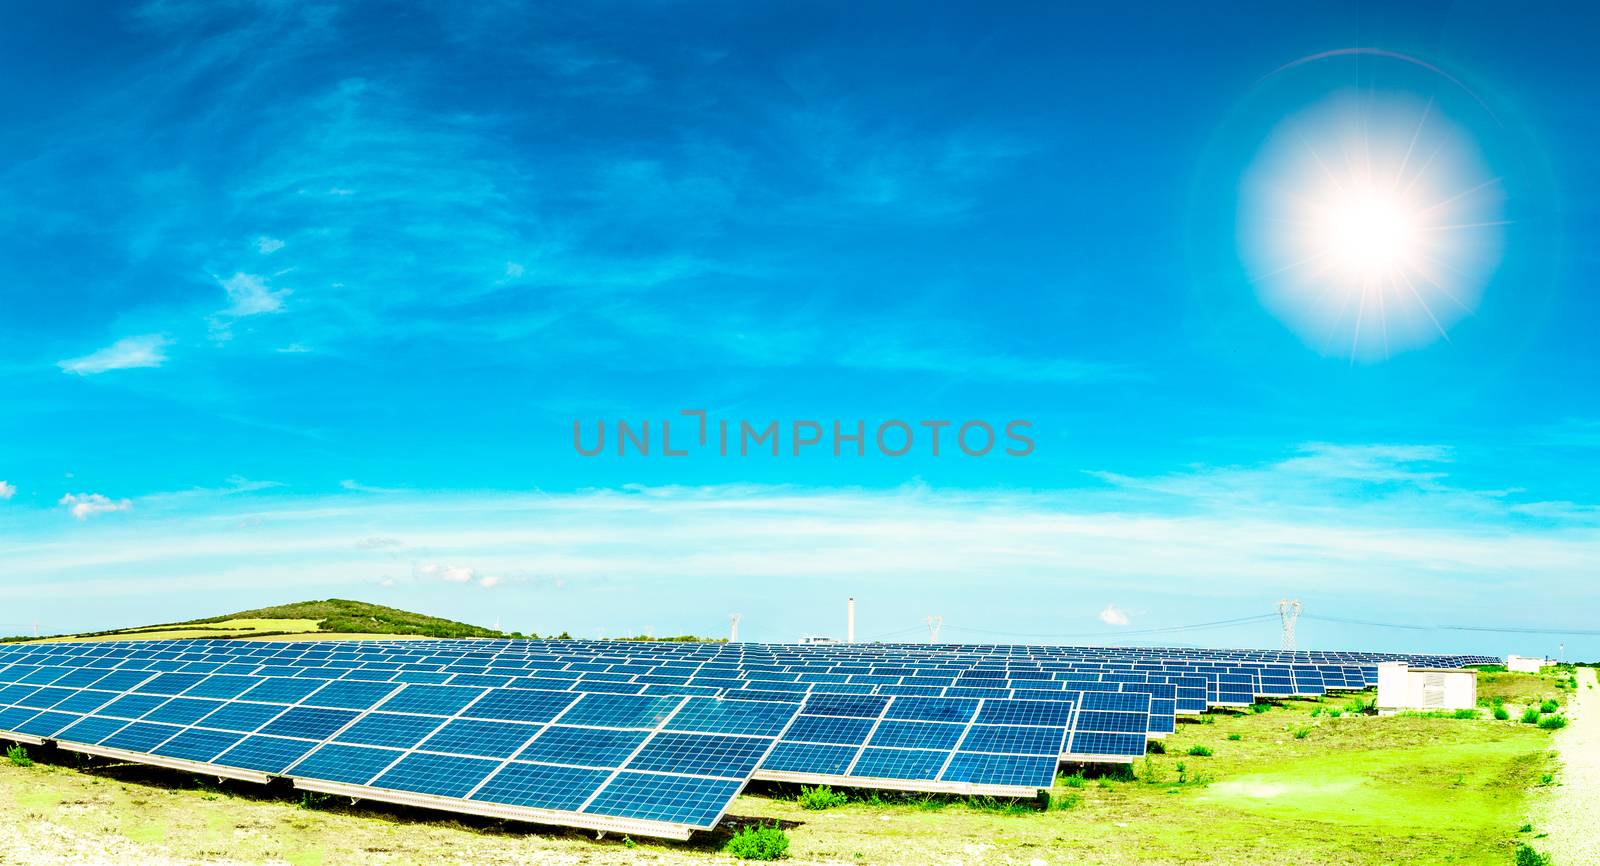 Field of photovoltaic panel in sunny day by replica